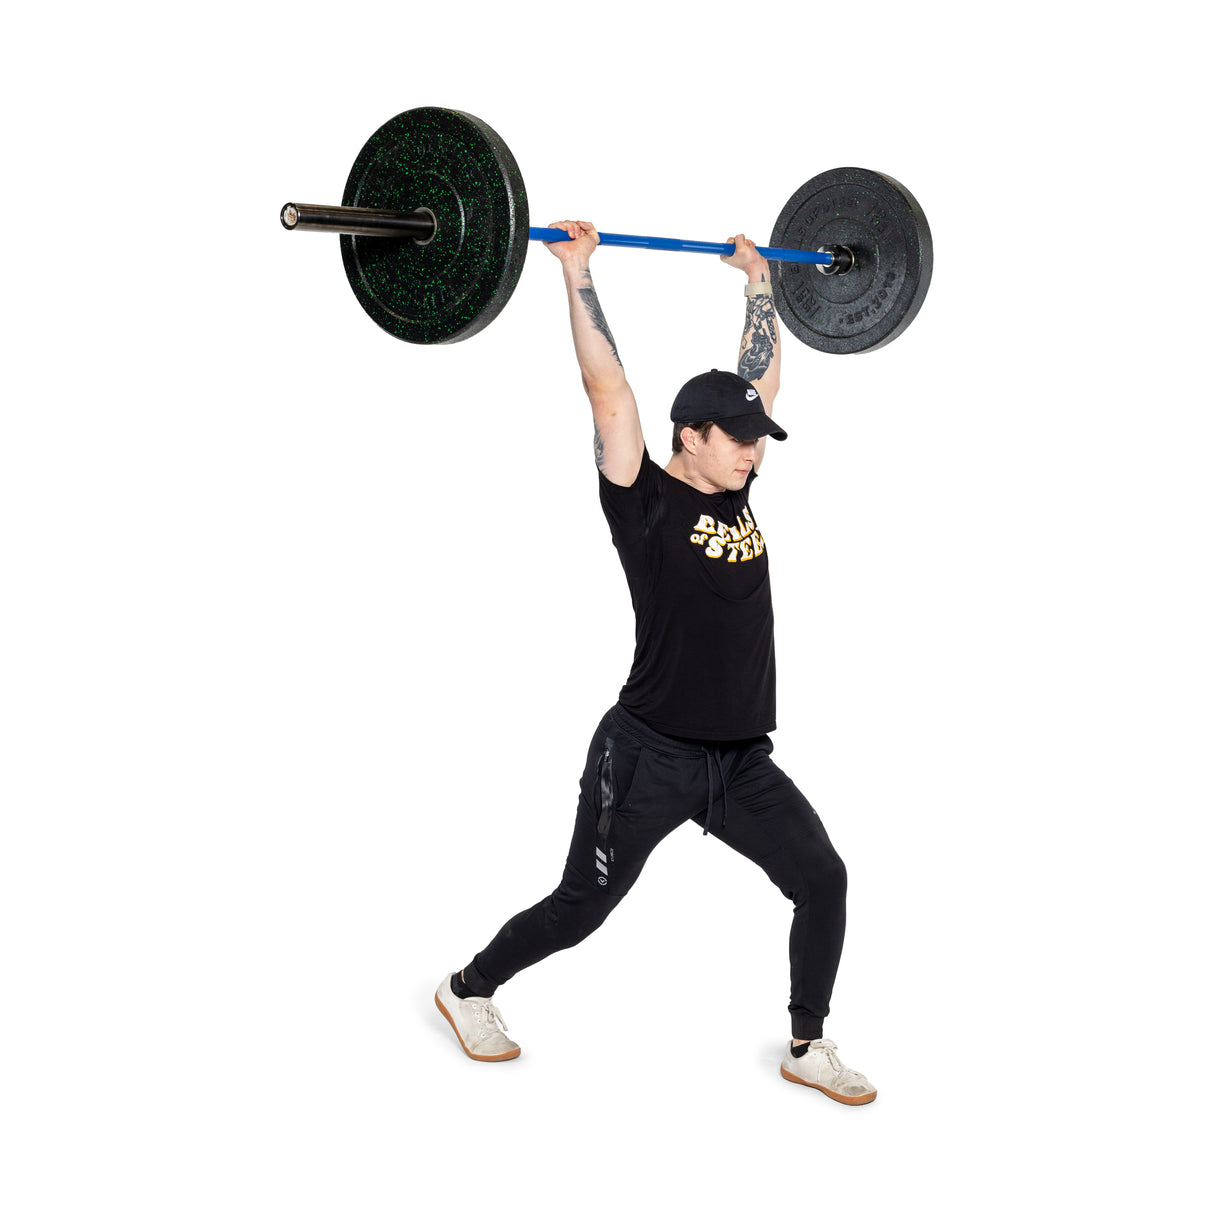 Male athlete doing overhead press using Hydra blue multi-purpose olympic barbell 